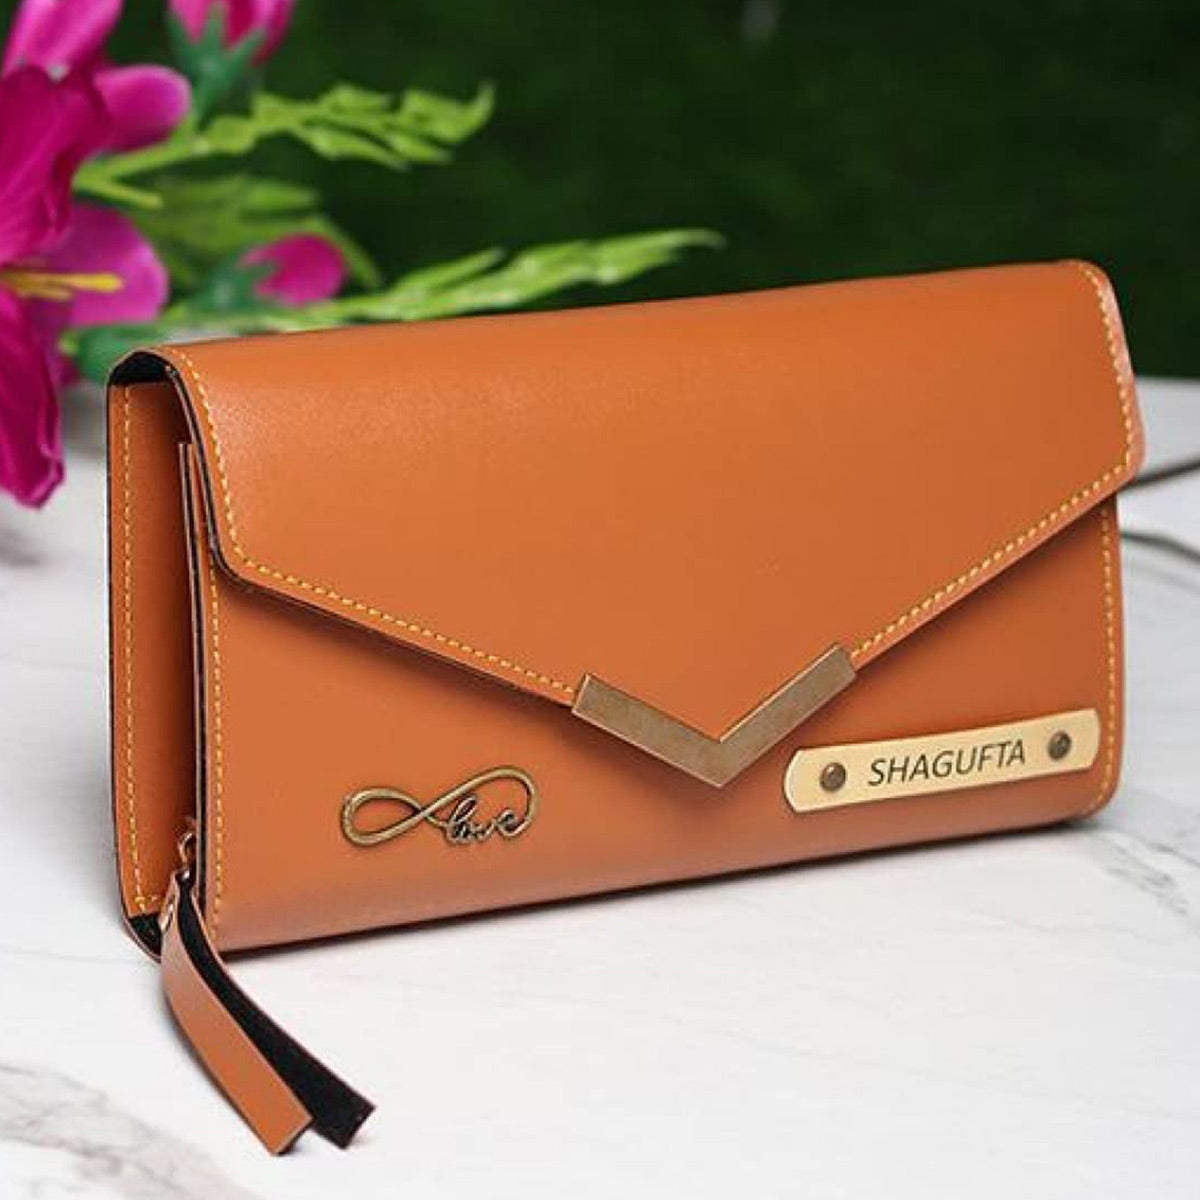 Buy Personalized Clutch Initials Pouch, Bag, Bridal Bag, Handbag Online in  India - Etsy